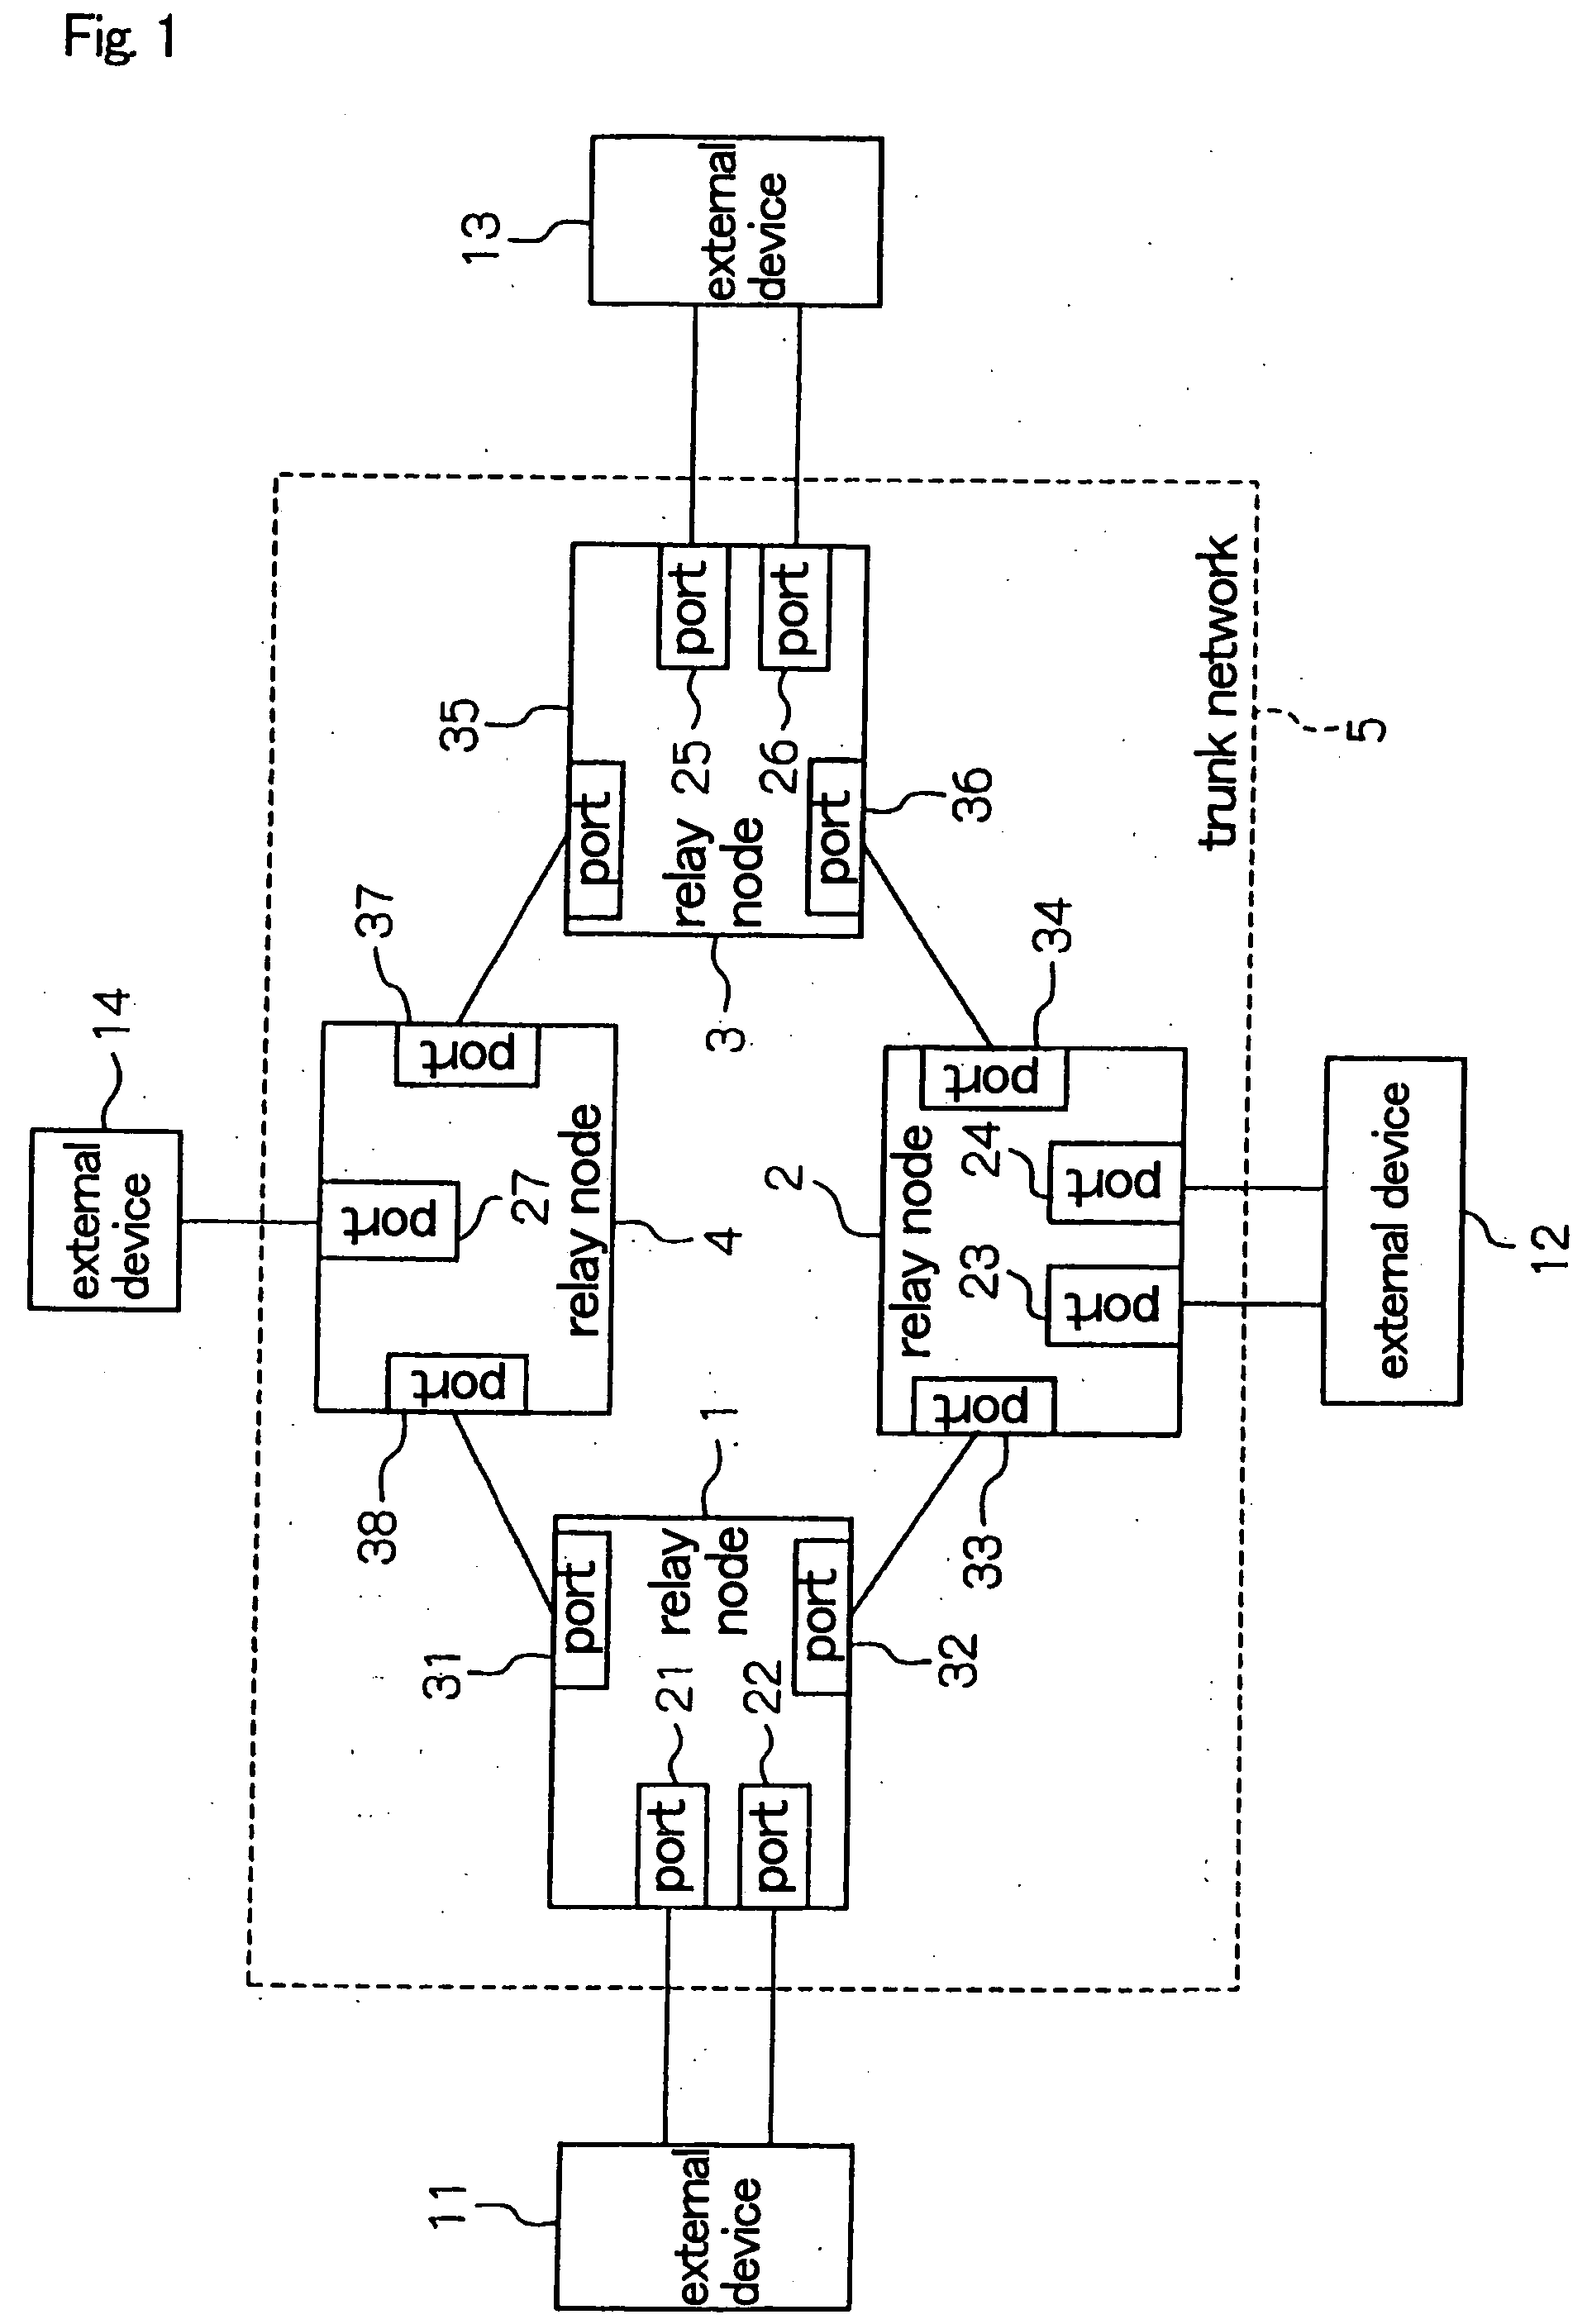 Trunk network system for multipoint-to-multipoint relay